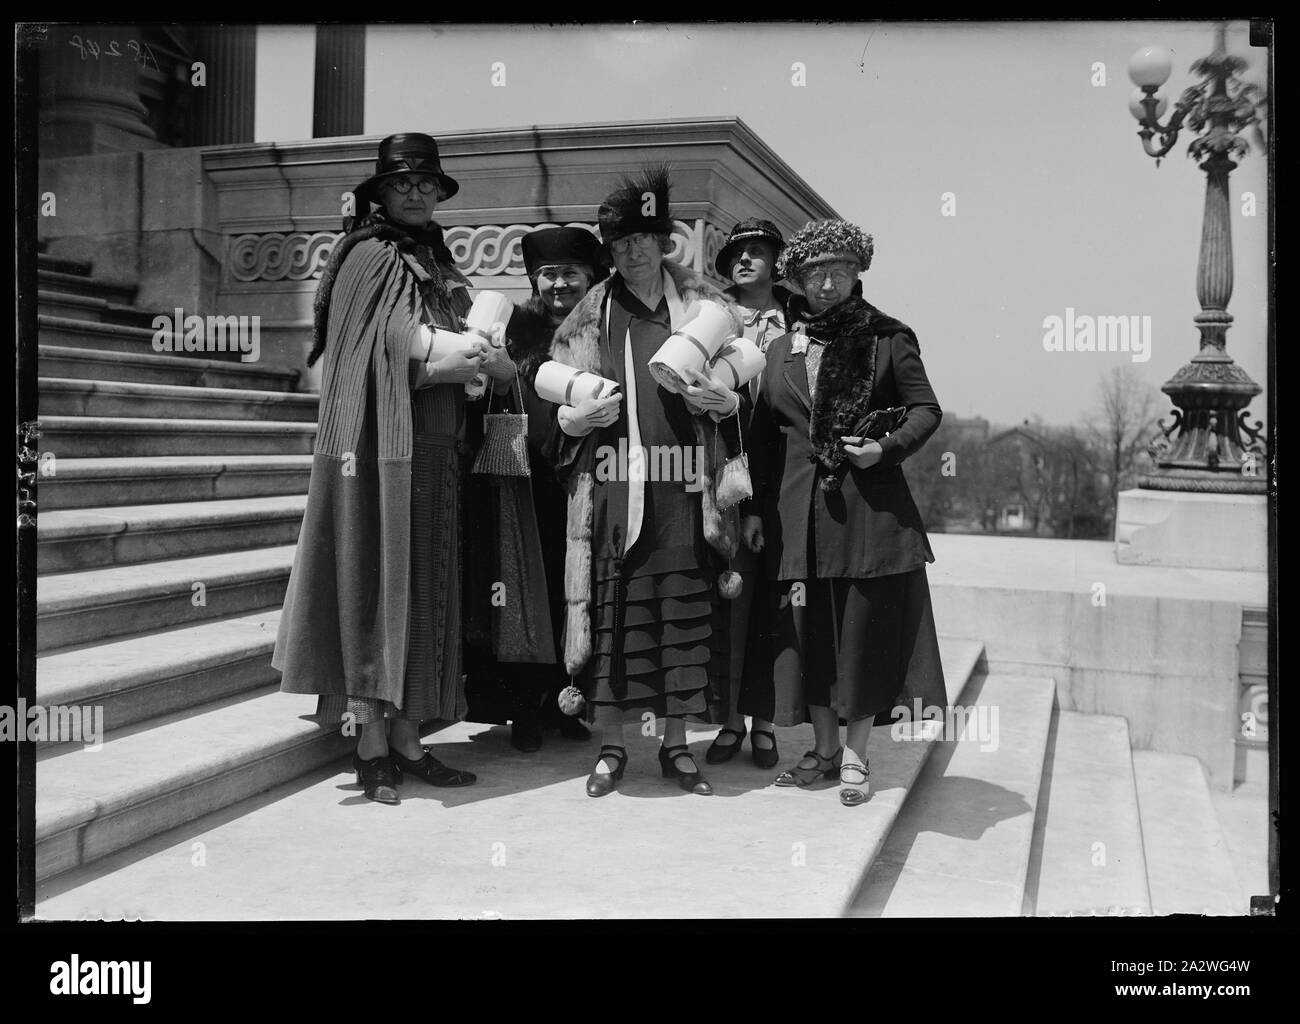 Rep. from six Iowa organizations present a petition of 35,000 names from 16 Iowa organizations urging a World Court to Congress. L to r: Mrs. Ernest W. Brown, Mrs. J.P. Mills, Miss Anne Cummings, sister of Sen. Cummings, Josephine Jenker, Mrs. E.W. Swalm, all from Des Moines, Iowa Stock Photo